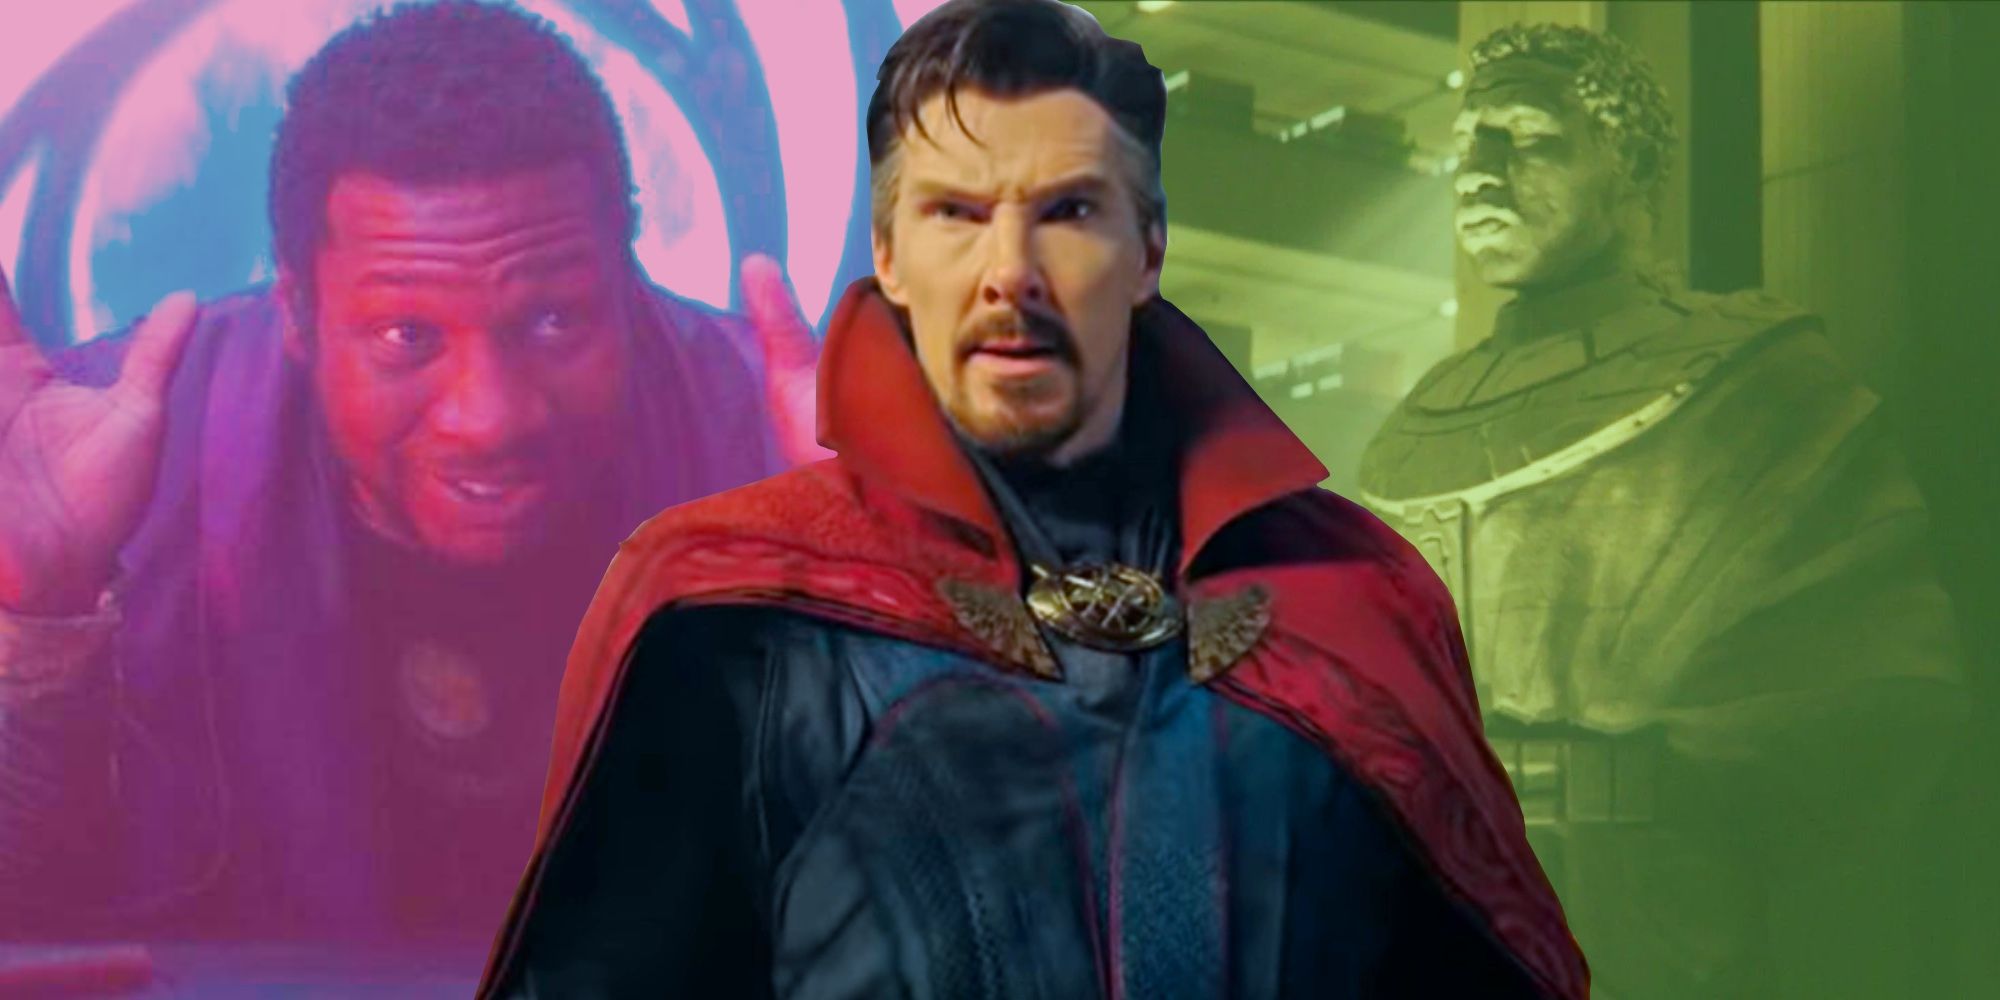 Kang the Conqueror and Doctor Strange